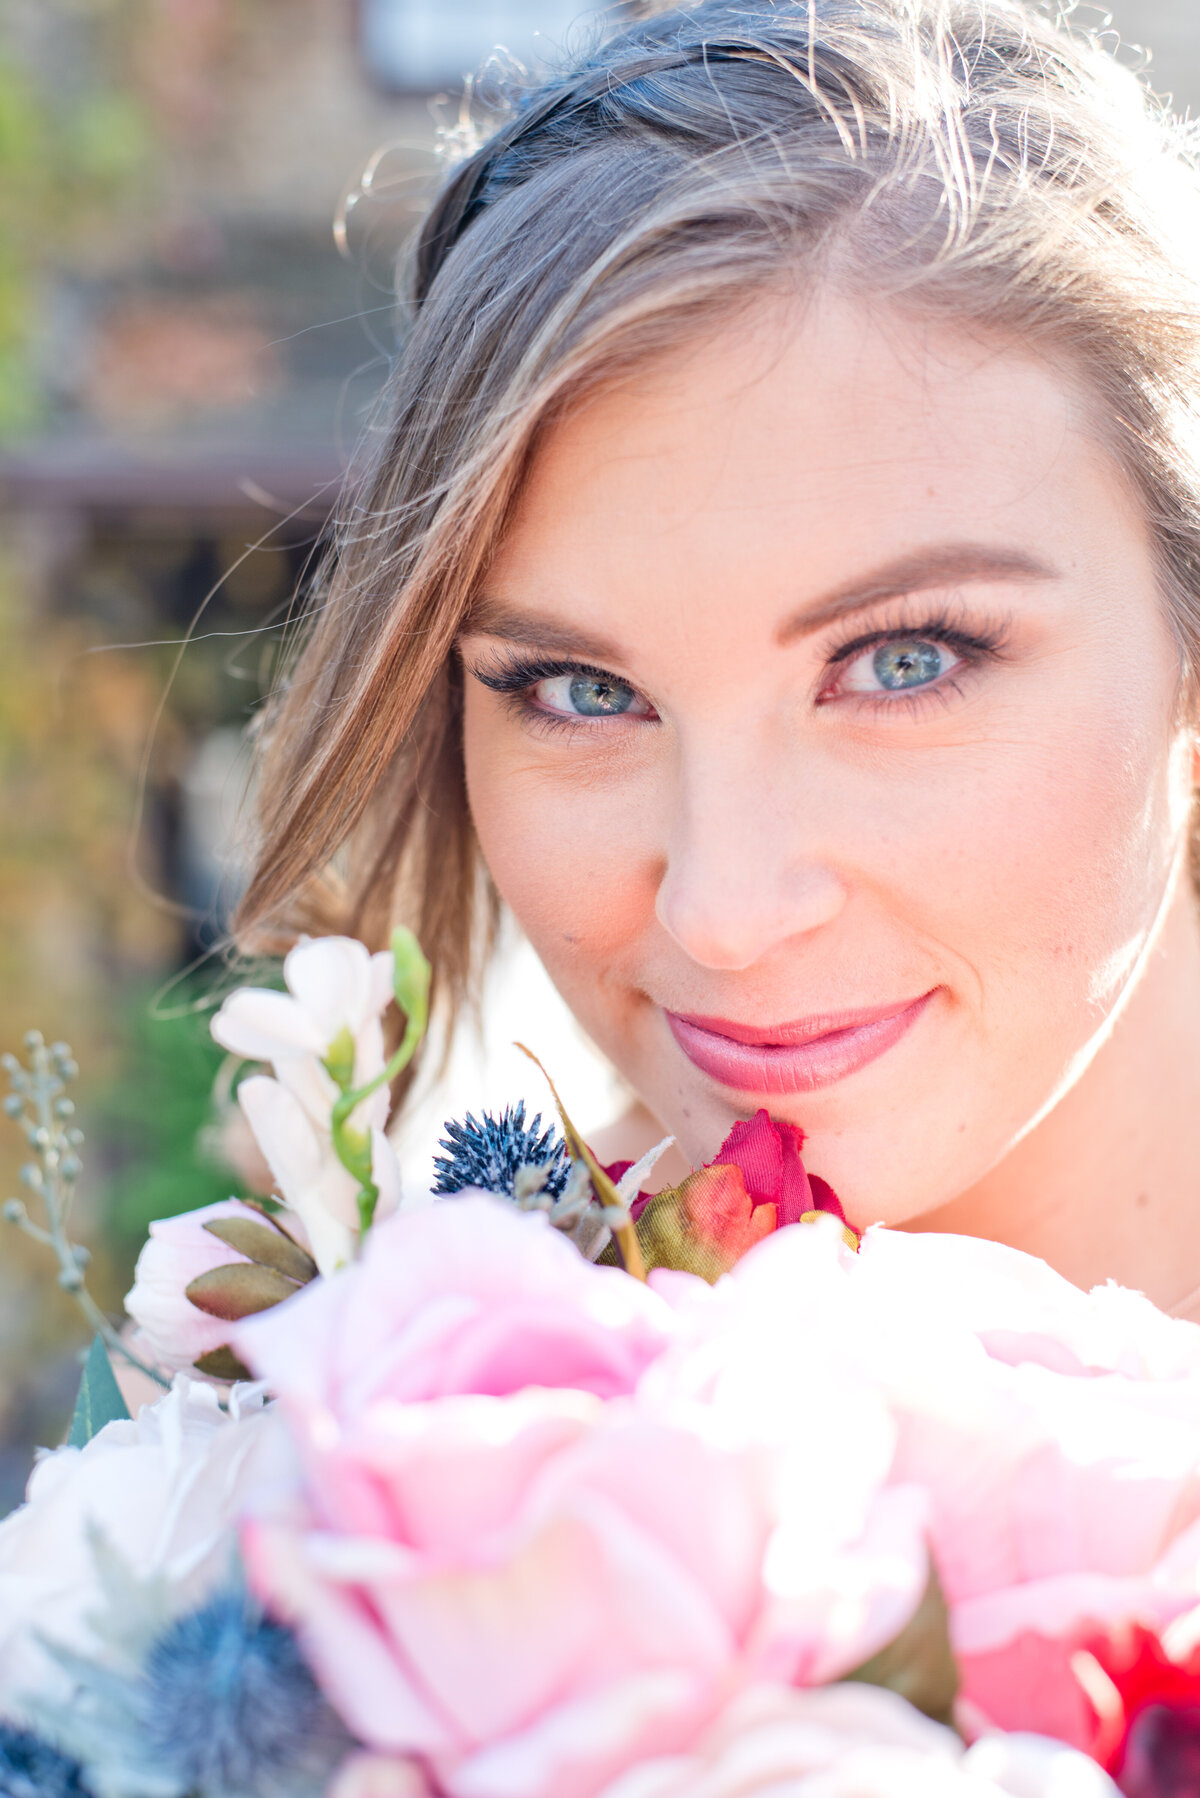 Fort Worth bride holding colorful bouquet and smiling